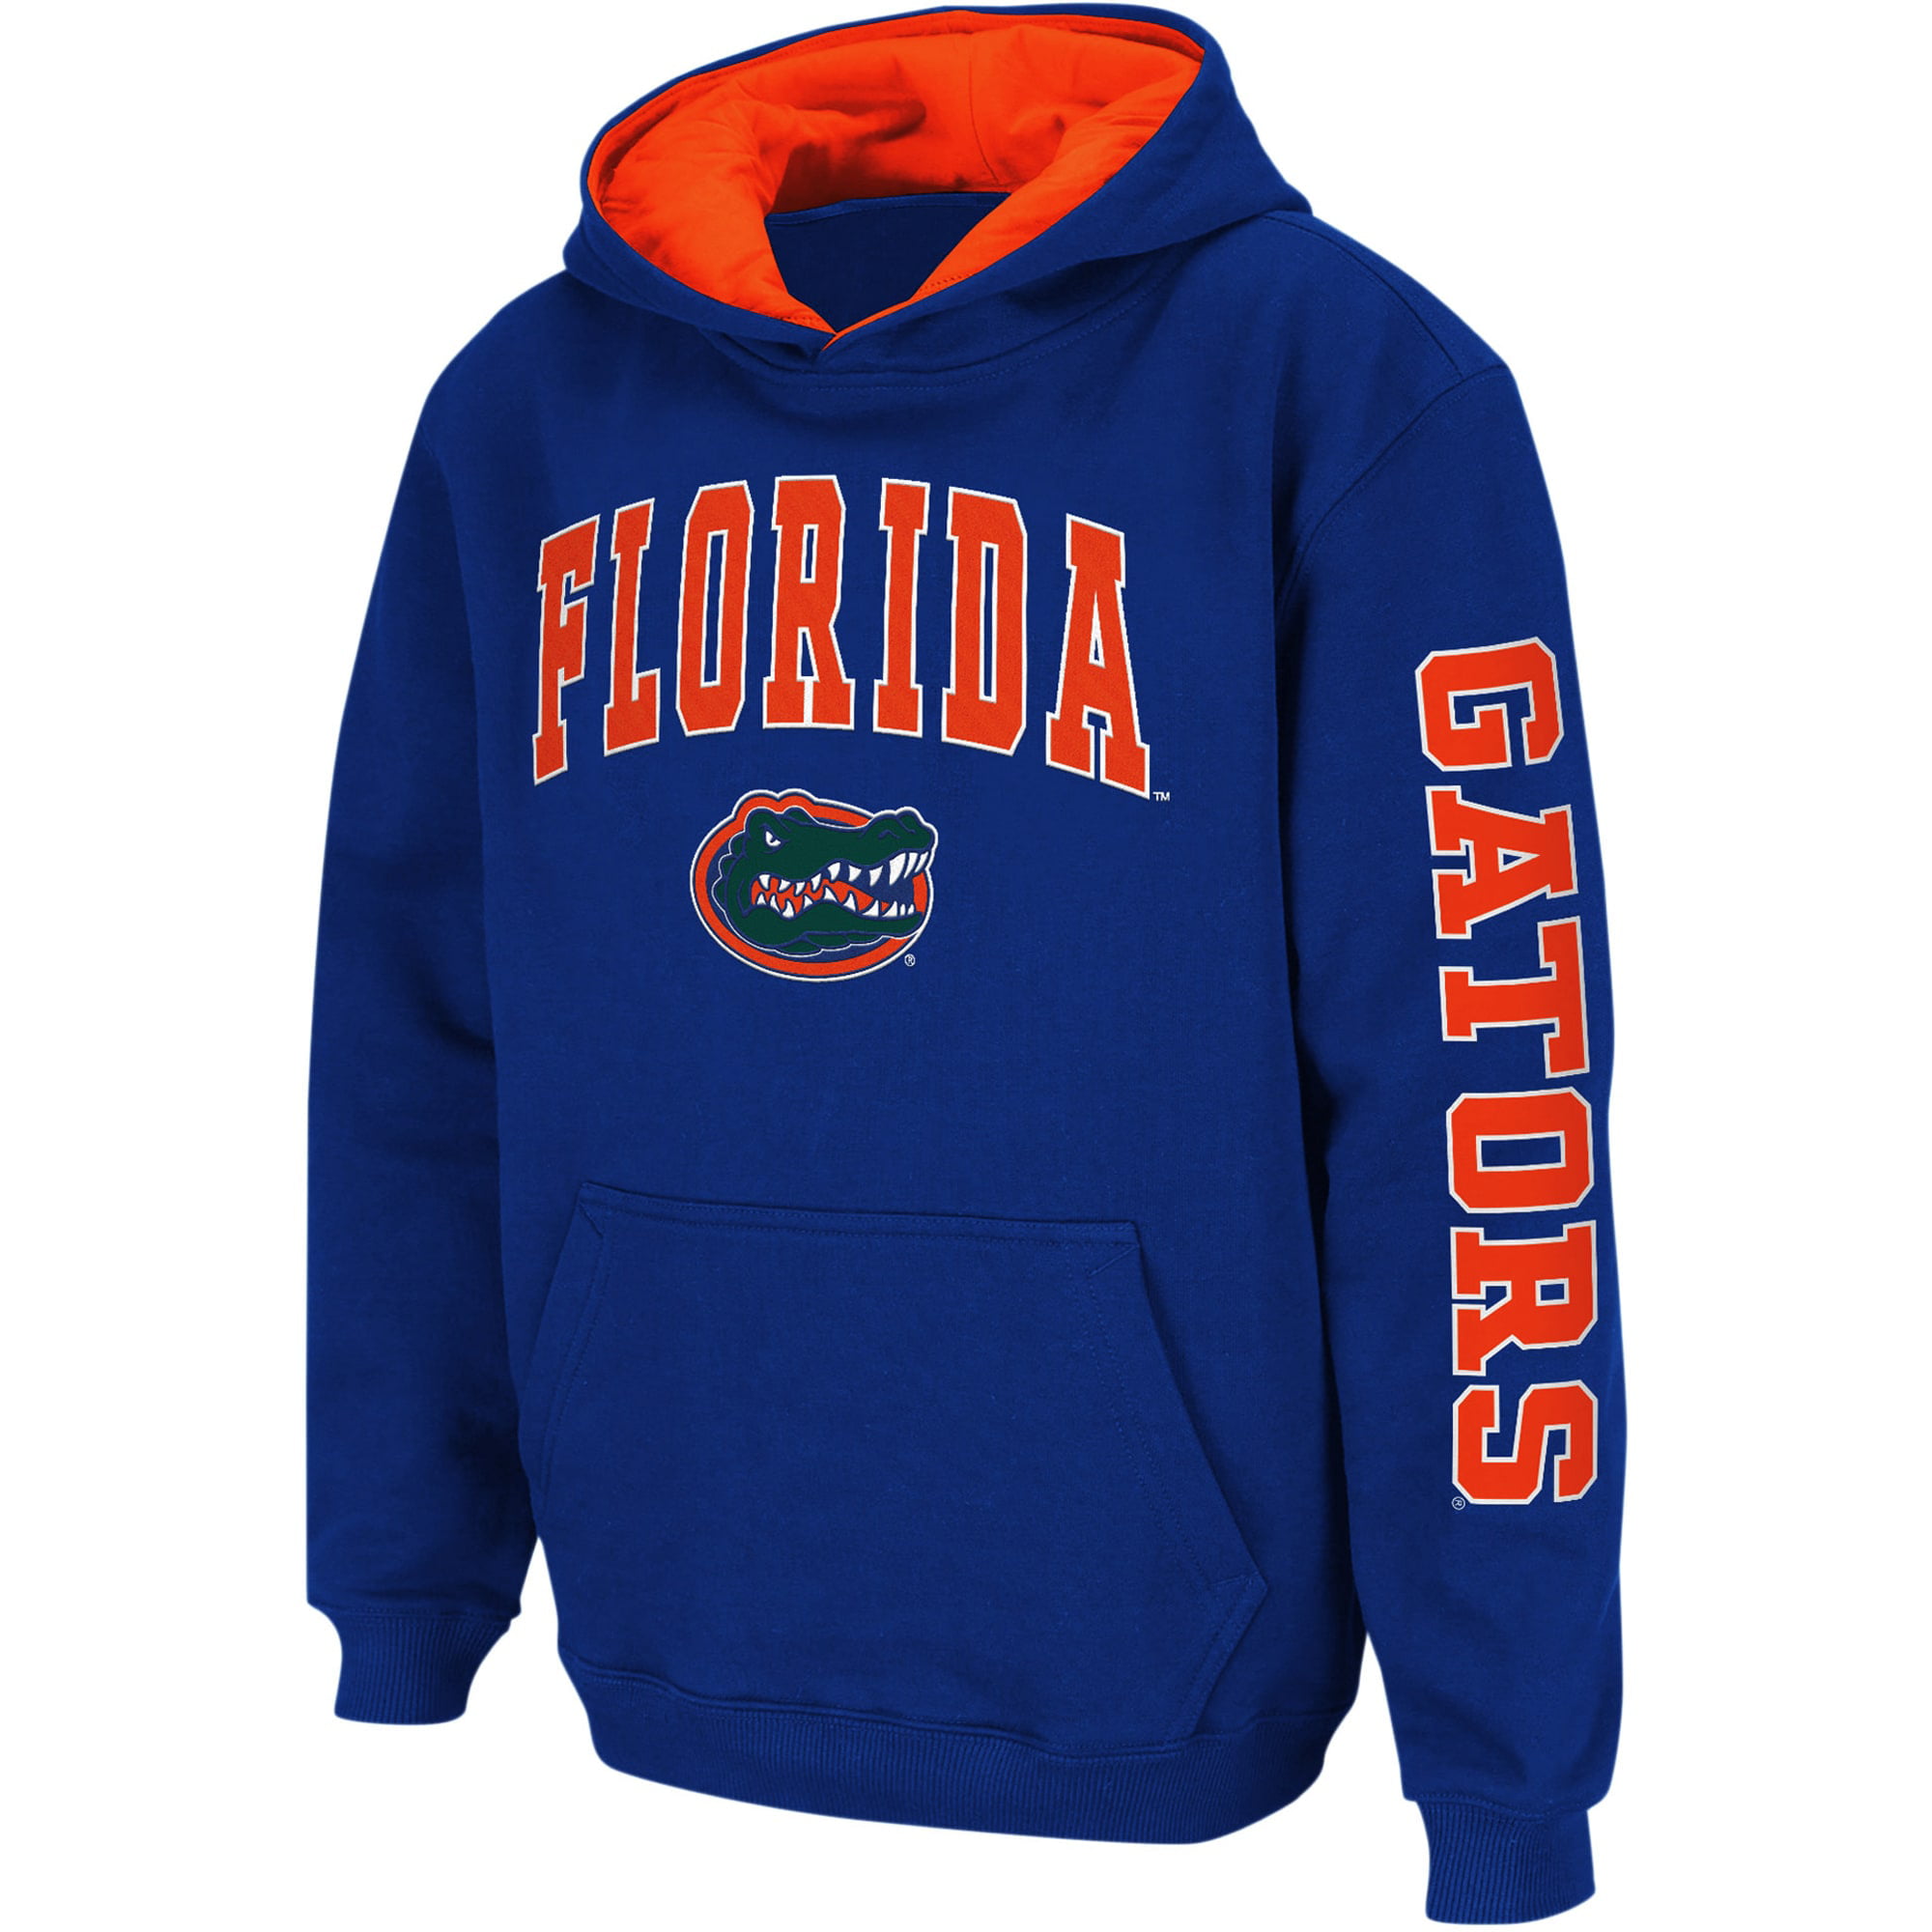 Youth Colosseum Royal Florida Gators 2-Hit Team Pullover Hoodie